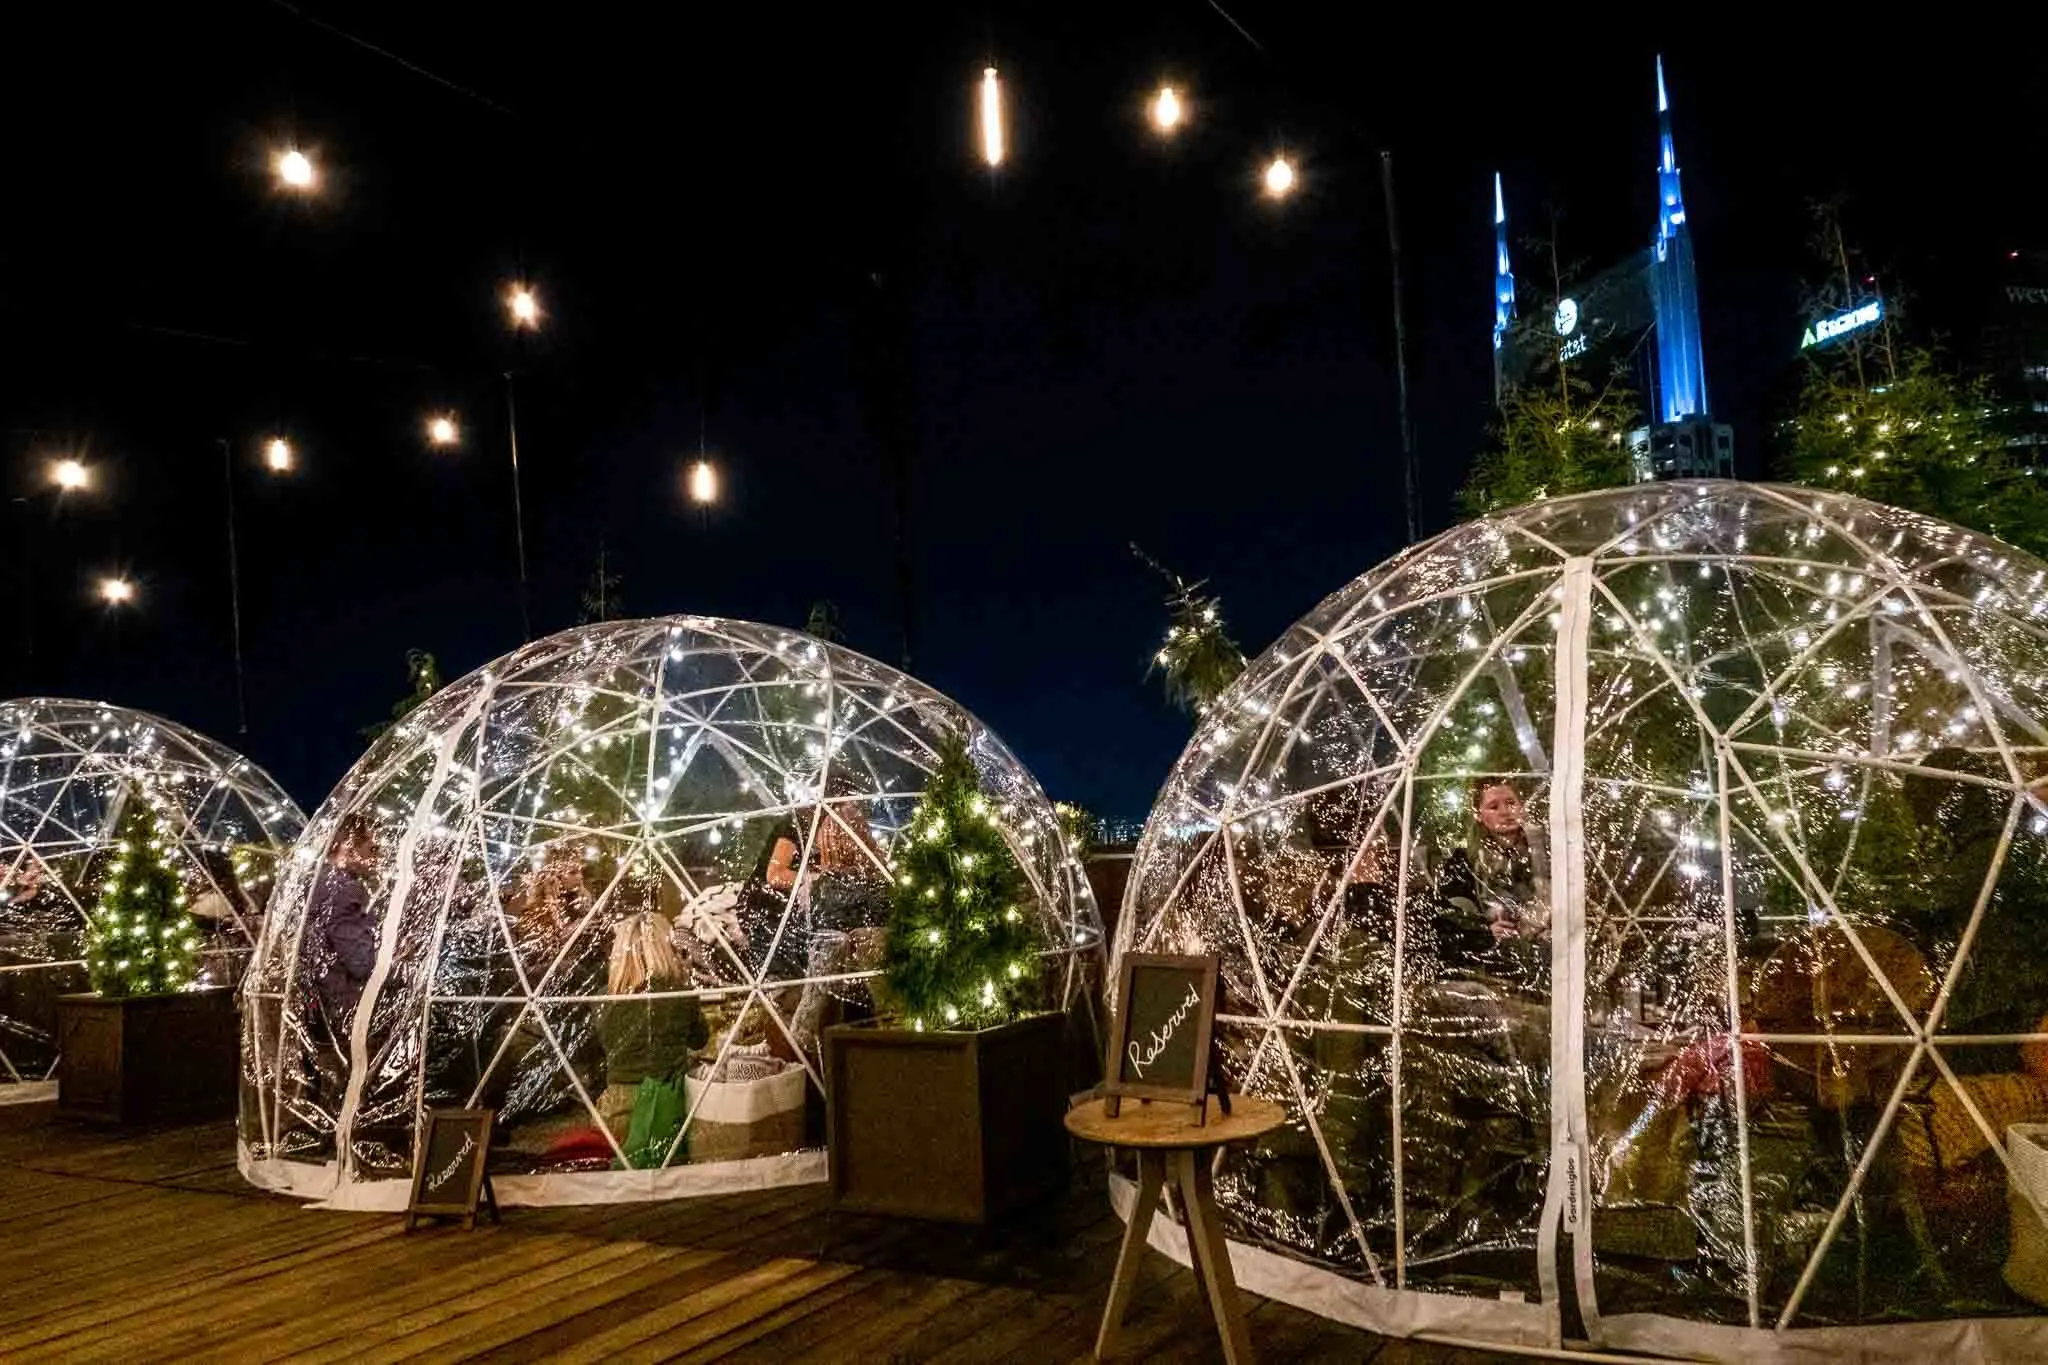 Igloo tents at night on a deck